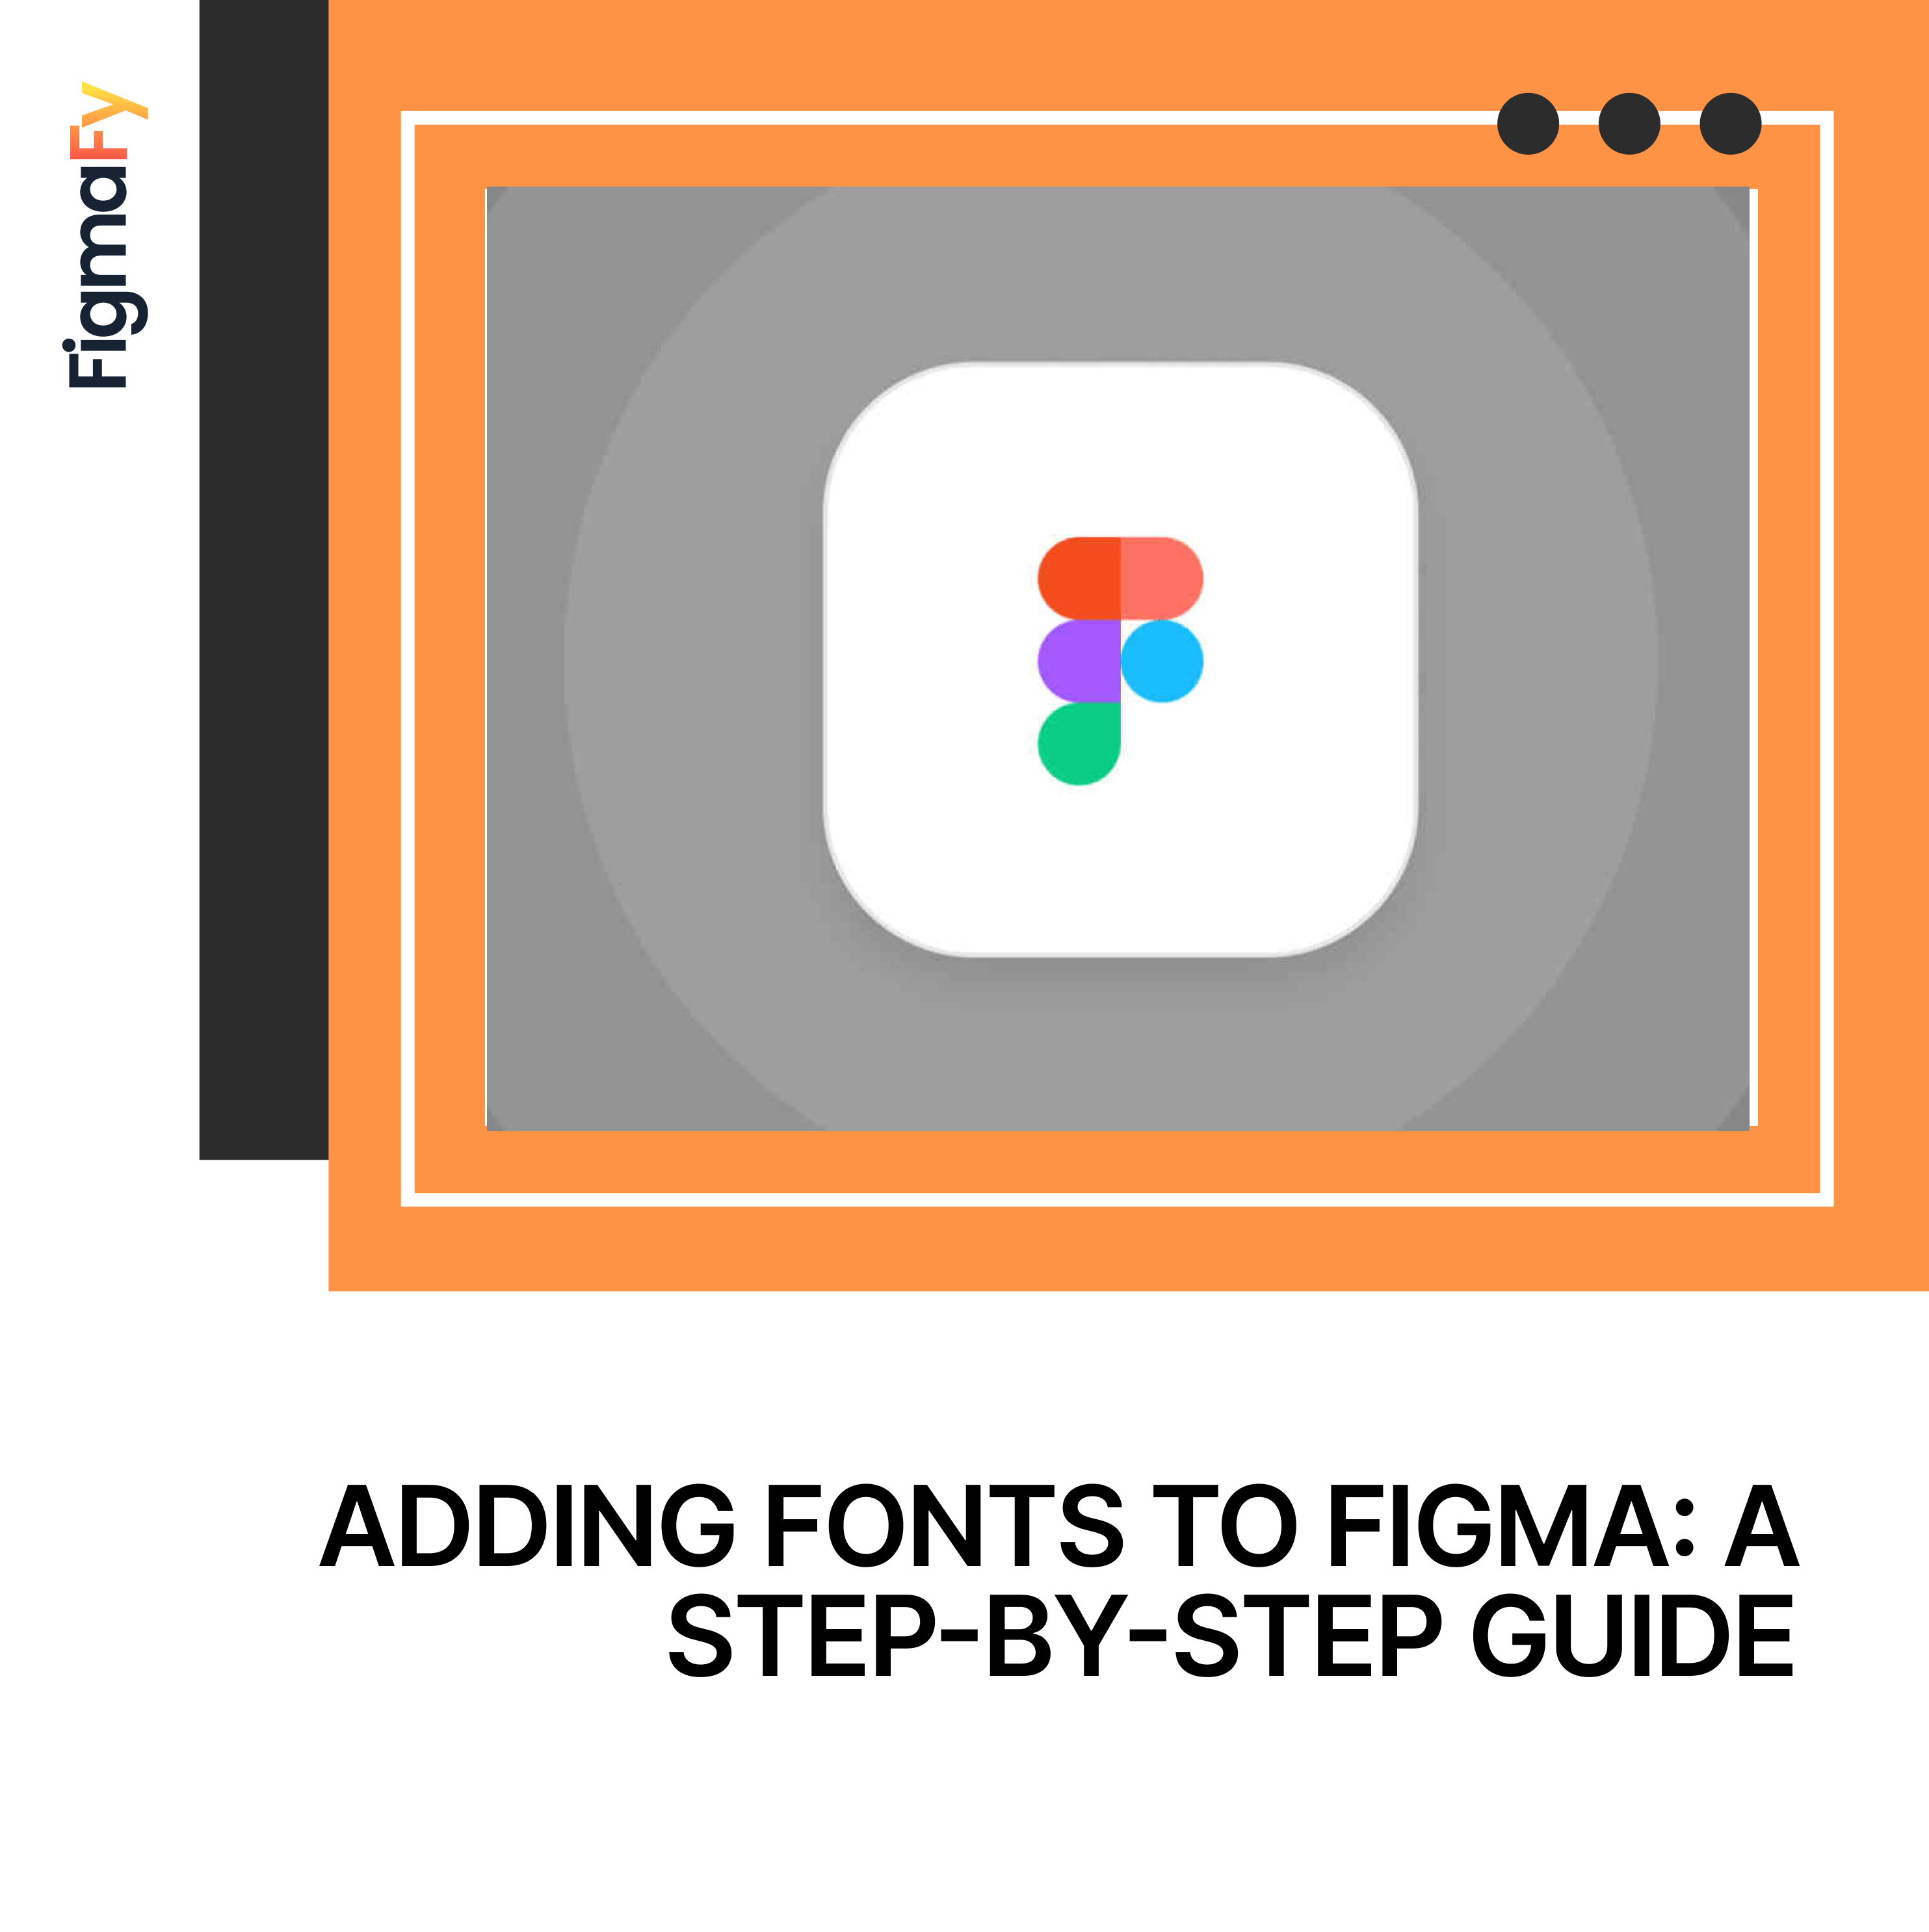 Adding Fonts to Figma